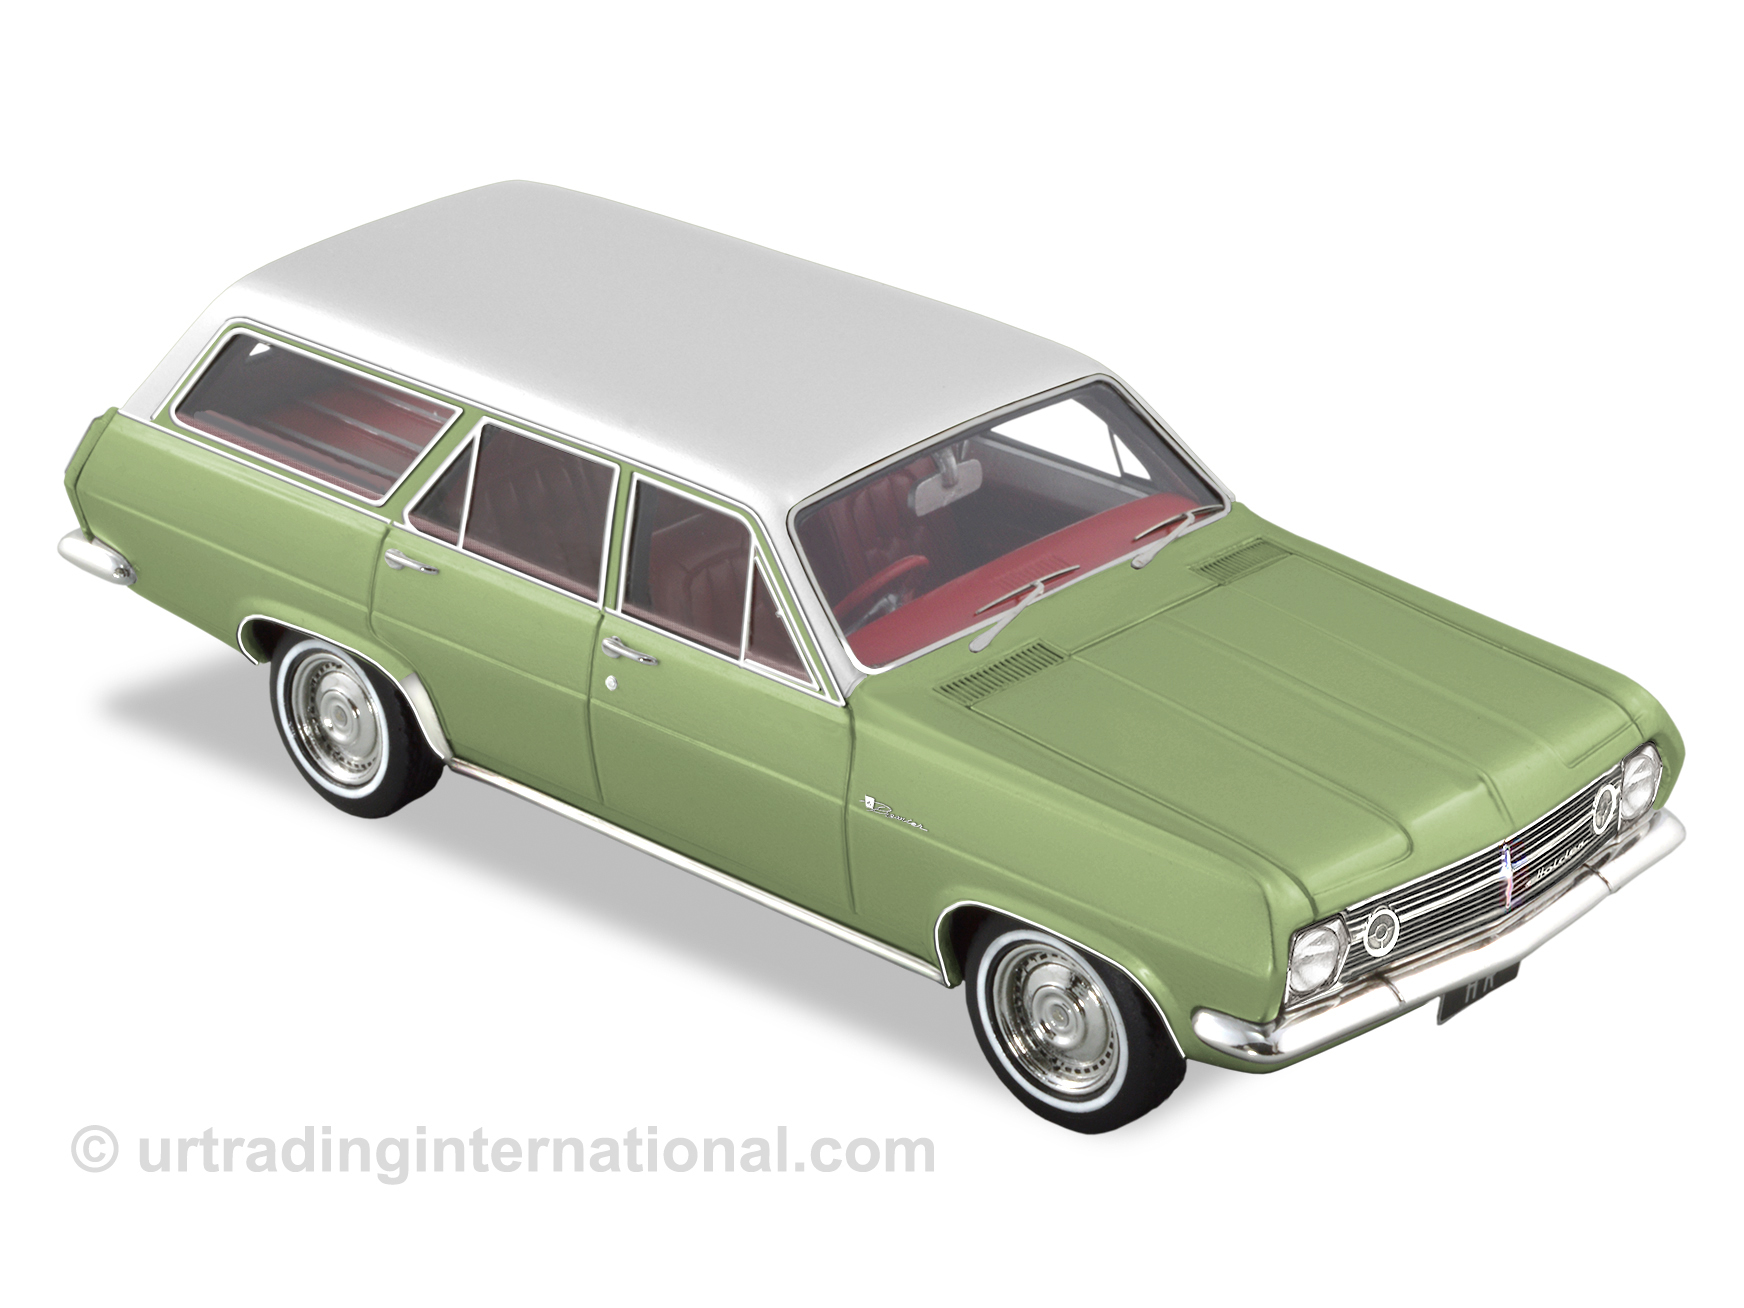 1967 HR Station Wagon – Finisterre Green